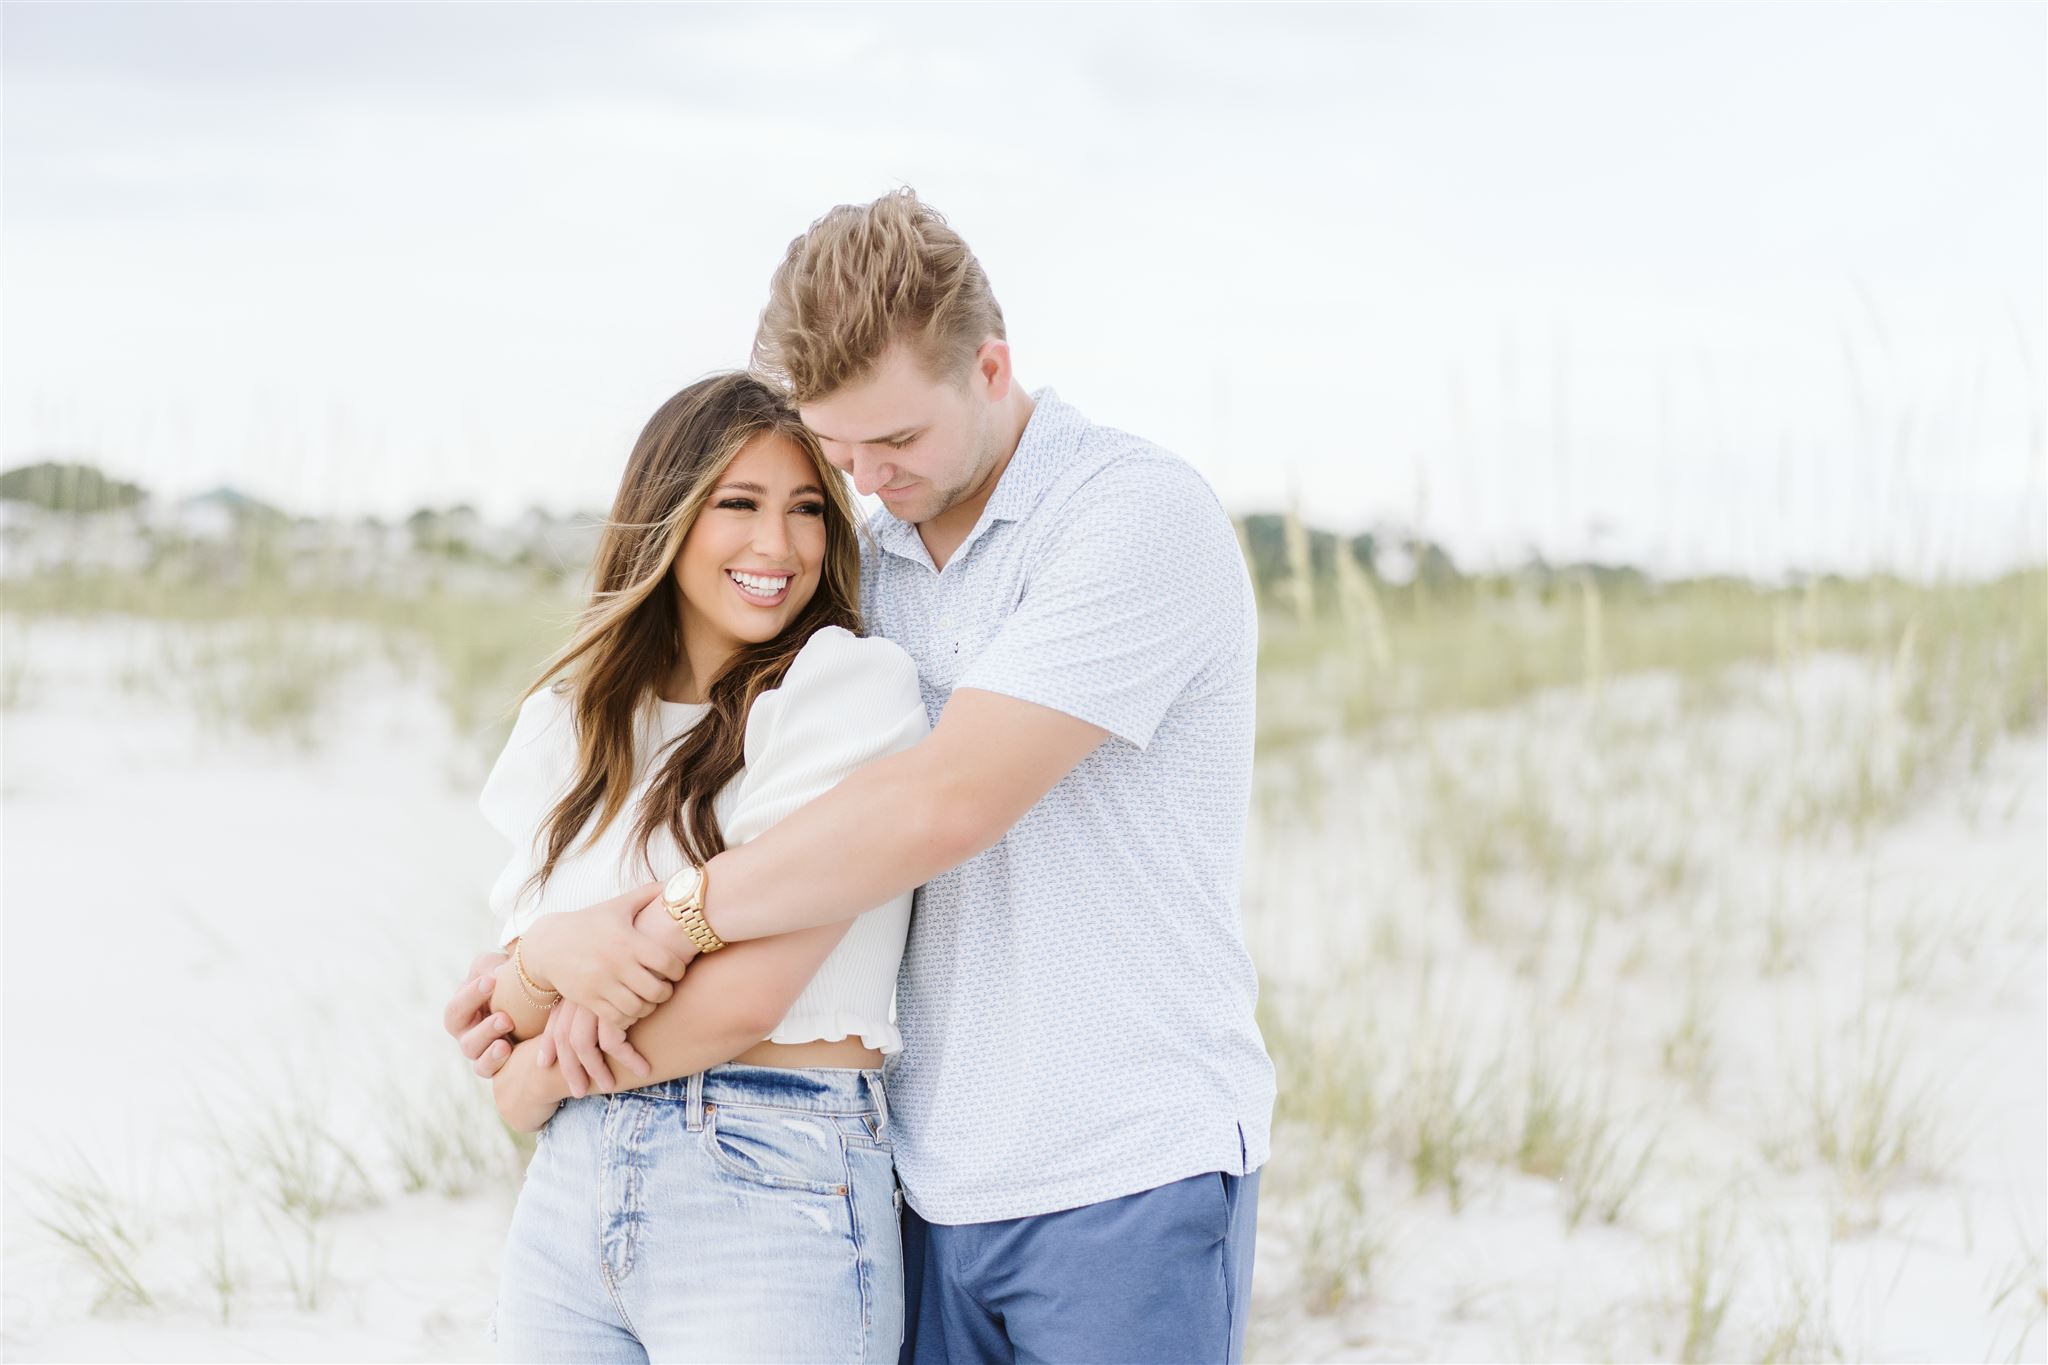 Rosemary Beach engagement session taken at Camp Helen State Park